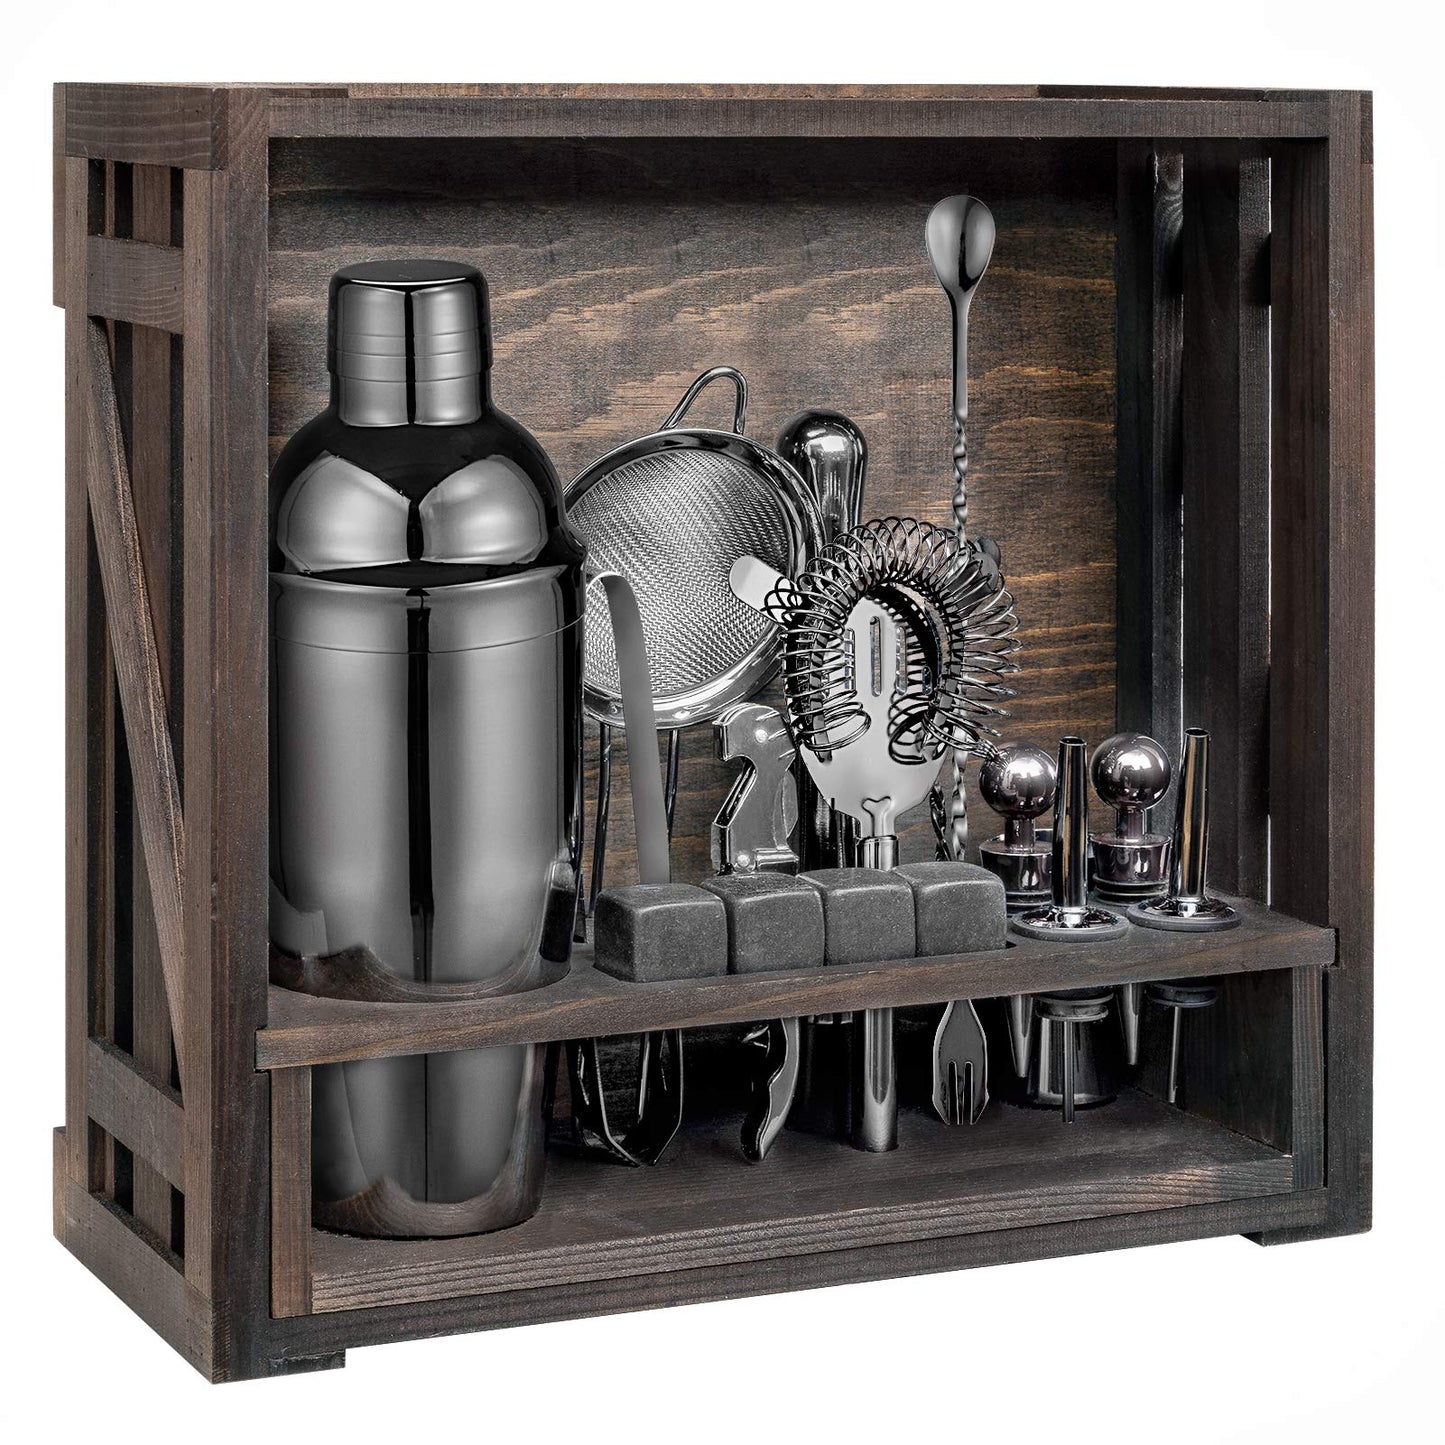 Oyydecor 18 Piece Cocktail Shaker Set with Rustic Pine Stand, Gifts for Men Dad Grandpa, Stainless Steel Bartender Kit Bar Tools Set, Home, Bars, Parties and Traveling (Black)